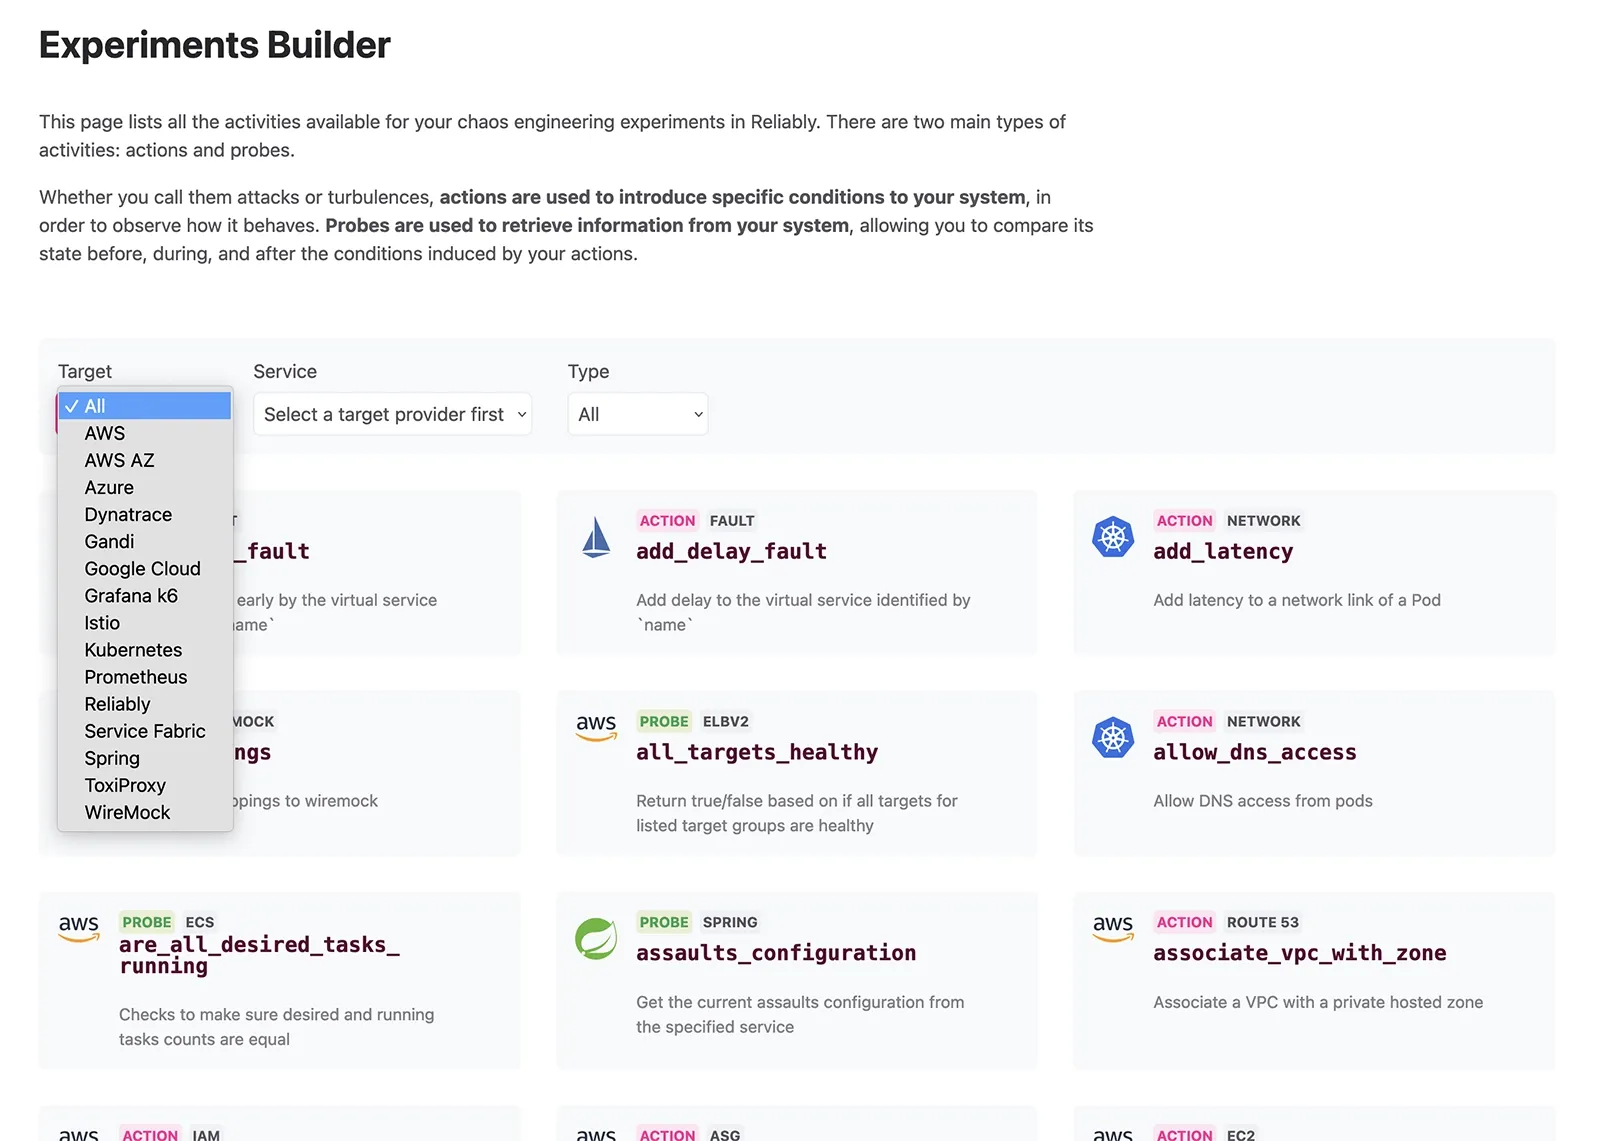 The list of activities is the first step in building experiments. A list of activities is displayed, with a select element open, showing different activites categories such as AWS, Azure, Google Cloud, Kubernetes, and more.